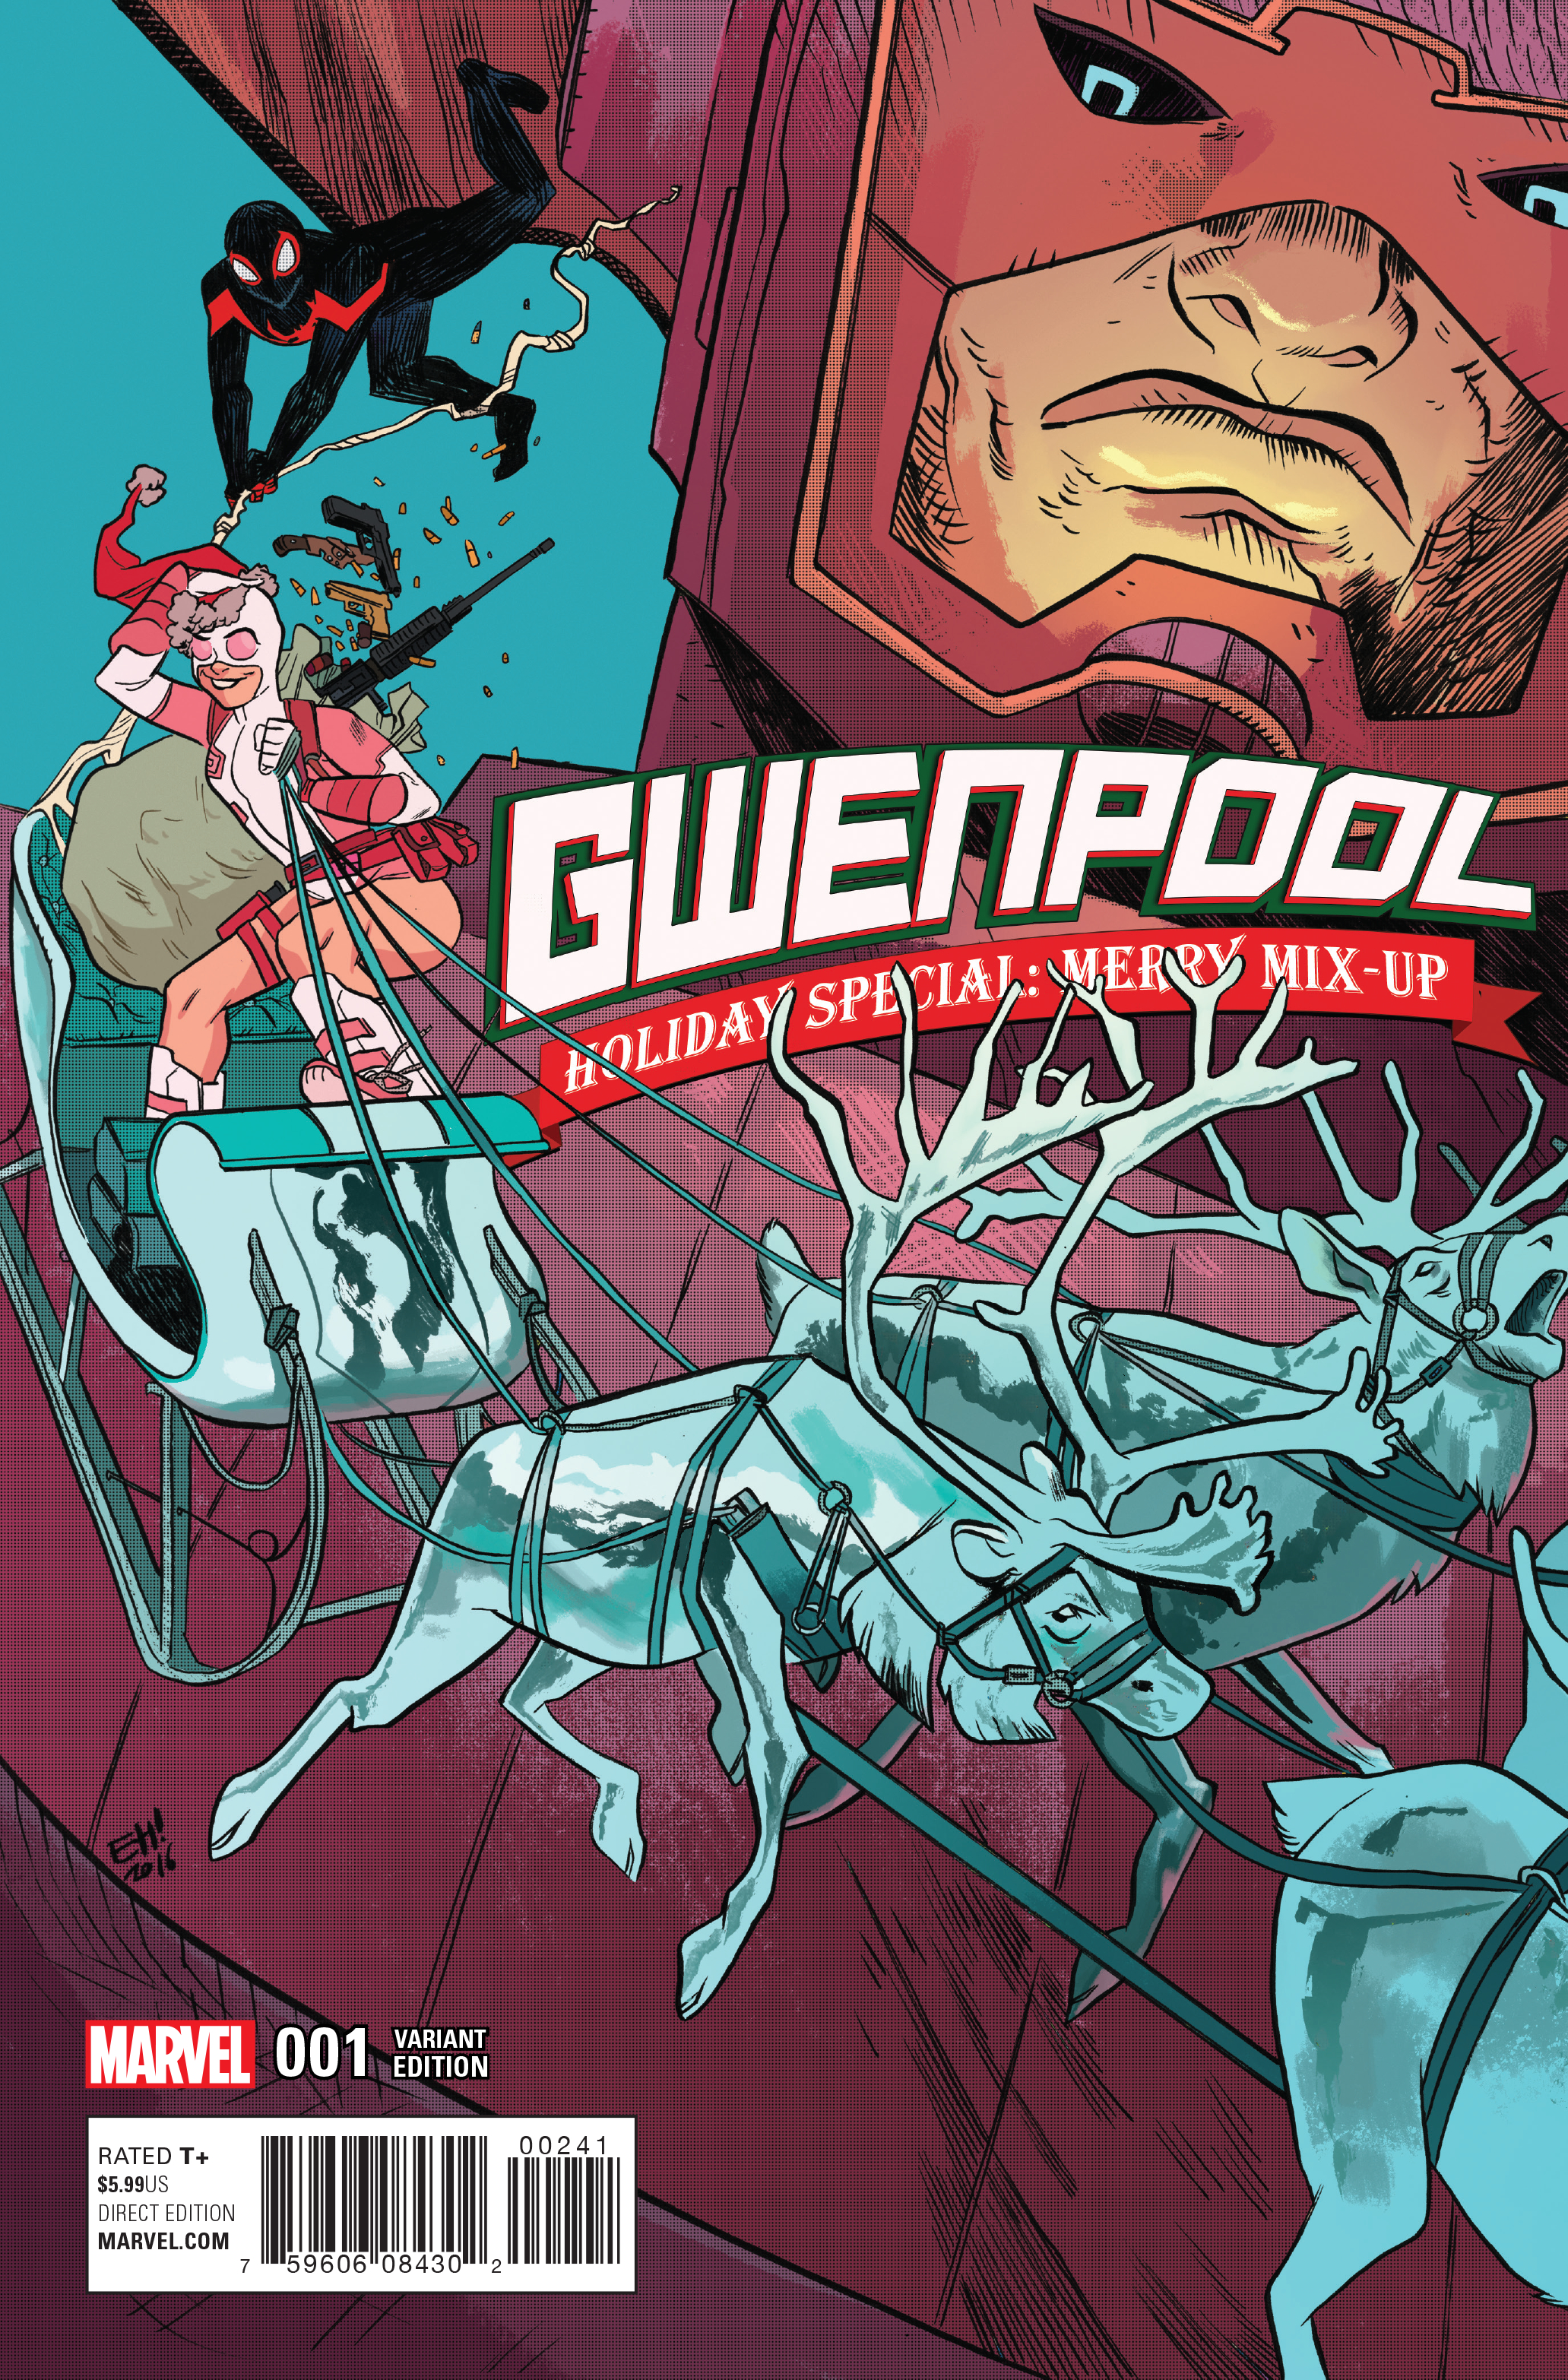 GWENPOOL HOLIDAY SPECIAL MERRY MIX UP HENDERSON VAR